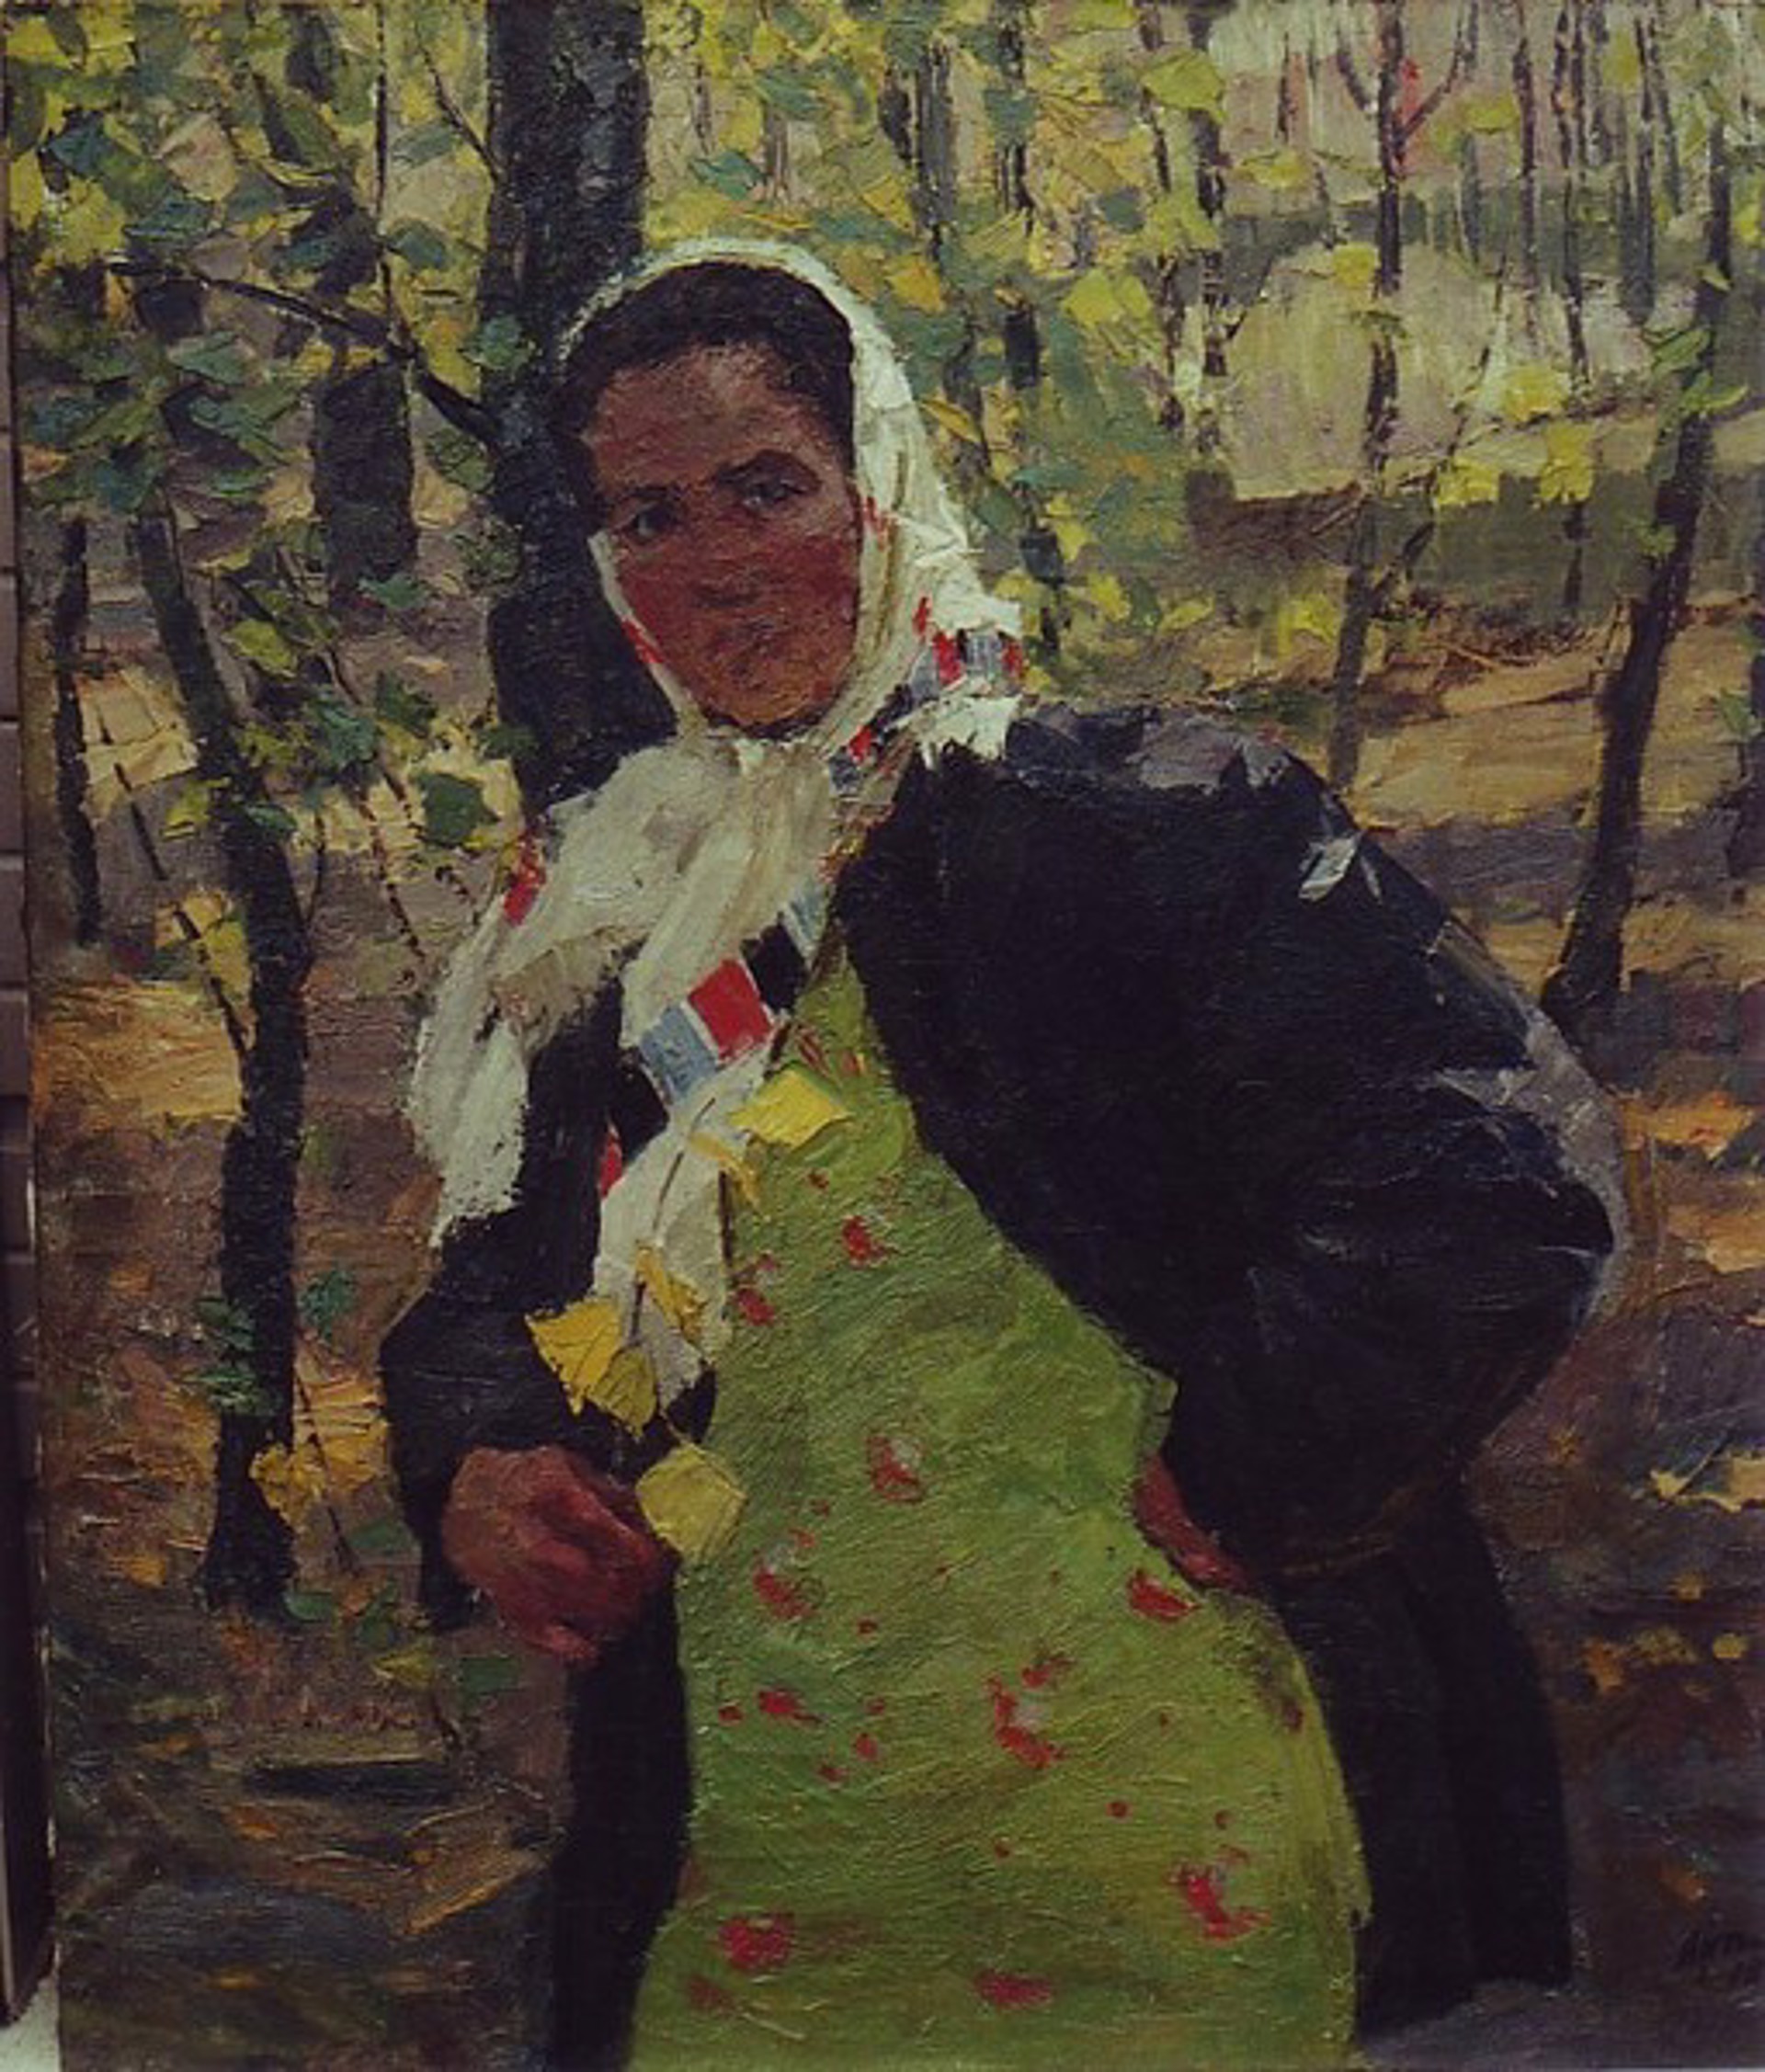 Catherine in the Woods by Mikhail Antonchik